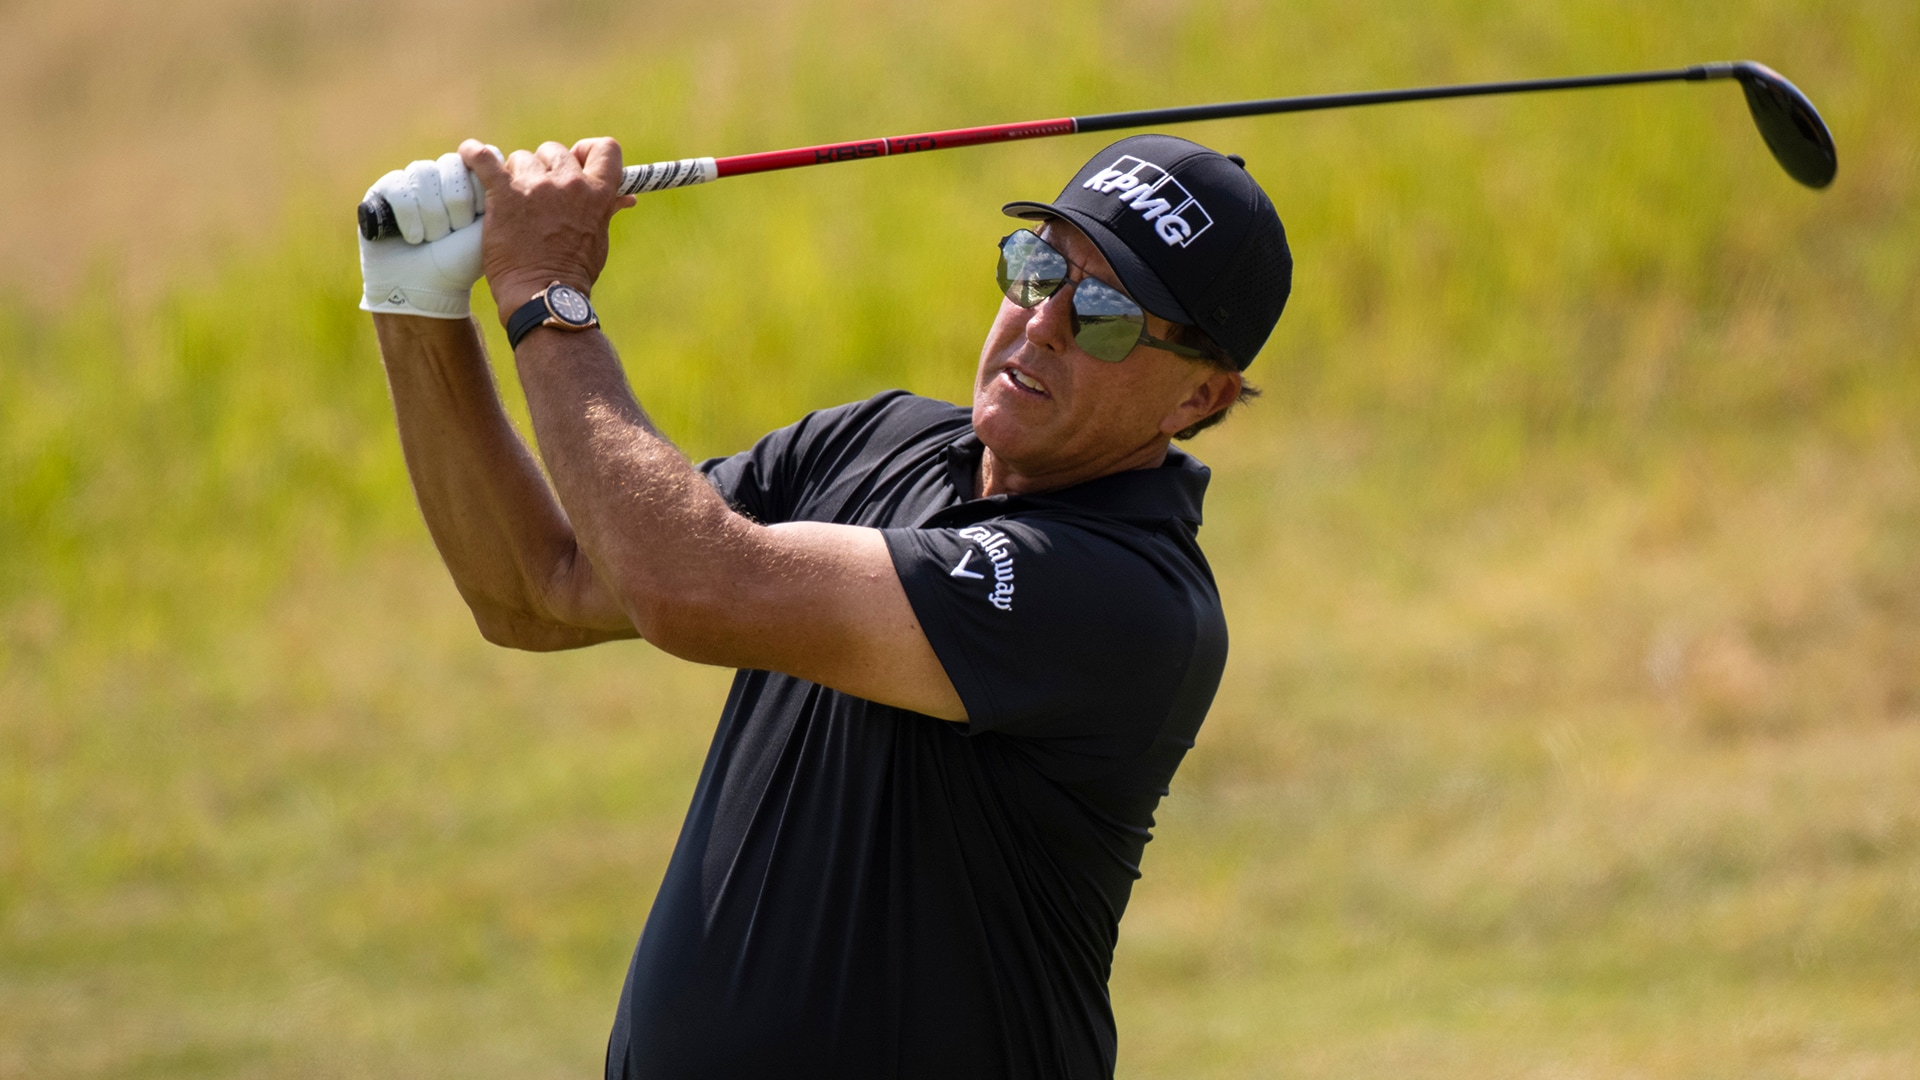 Phil Mickelson (61) leads after 18 holes of PGA Tour Champions debut